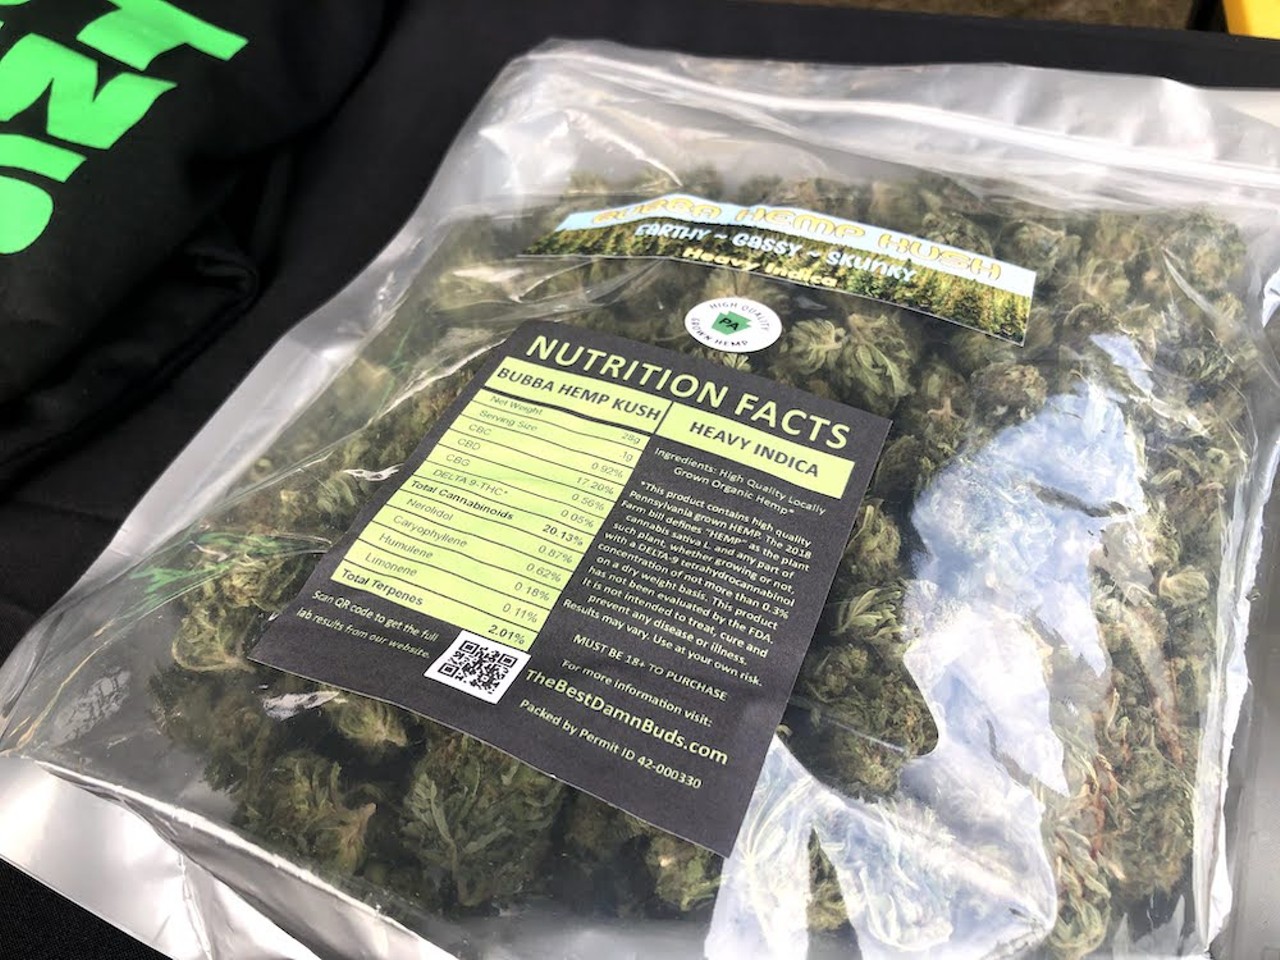 The Florida Cannabis Festival made things real mellow in Mount Dora last weekend